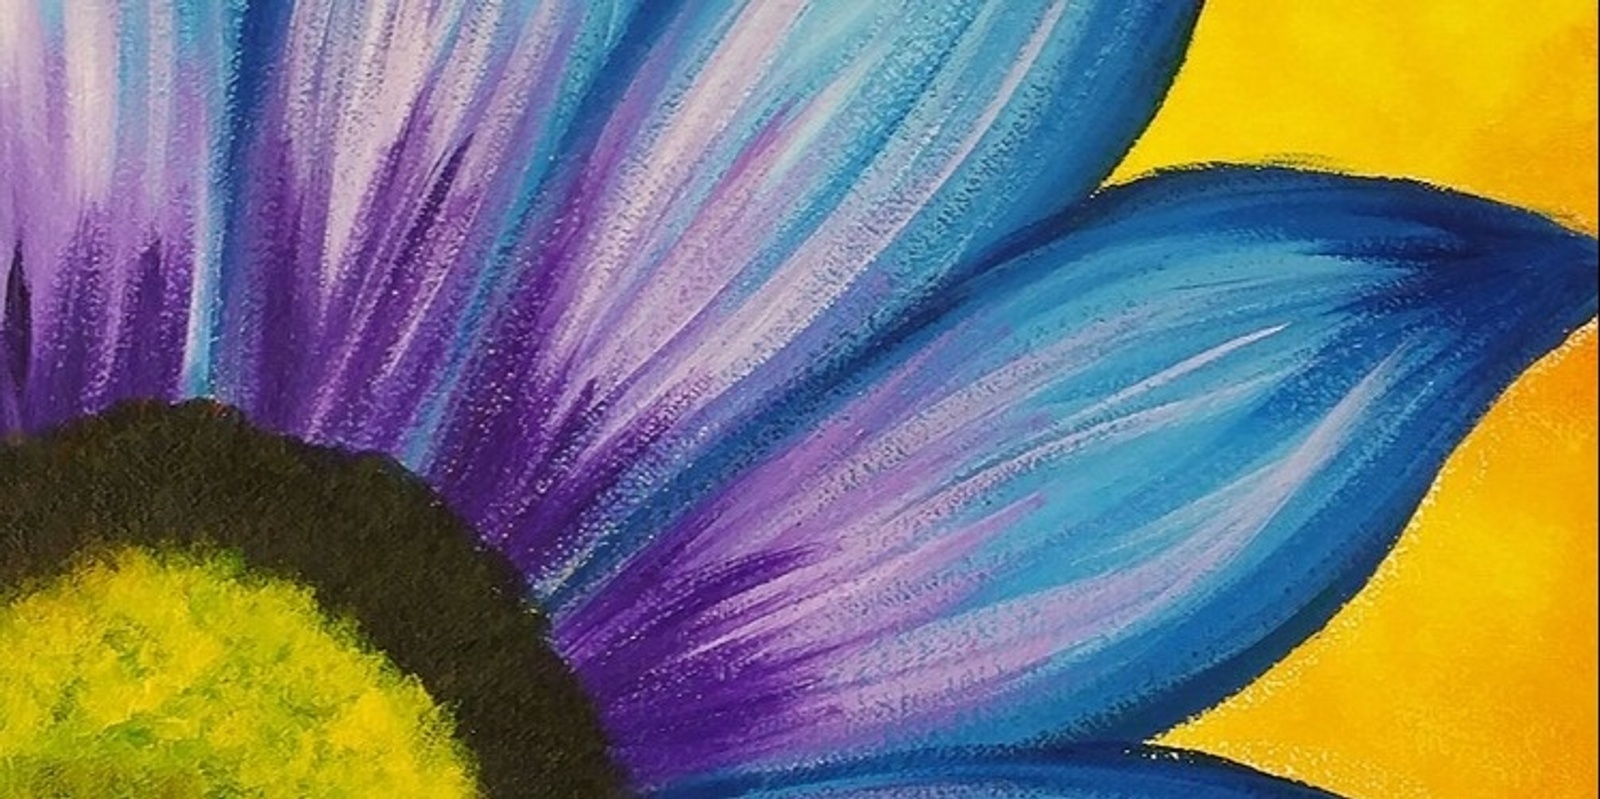 Casino Kids Painting Class Flower 3rd July - Creative Kids Vouchers Expire 30th June 23 - So Book Ahead, Book Now!